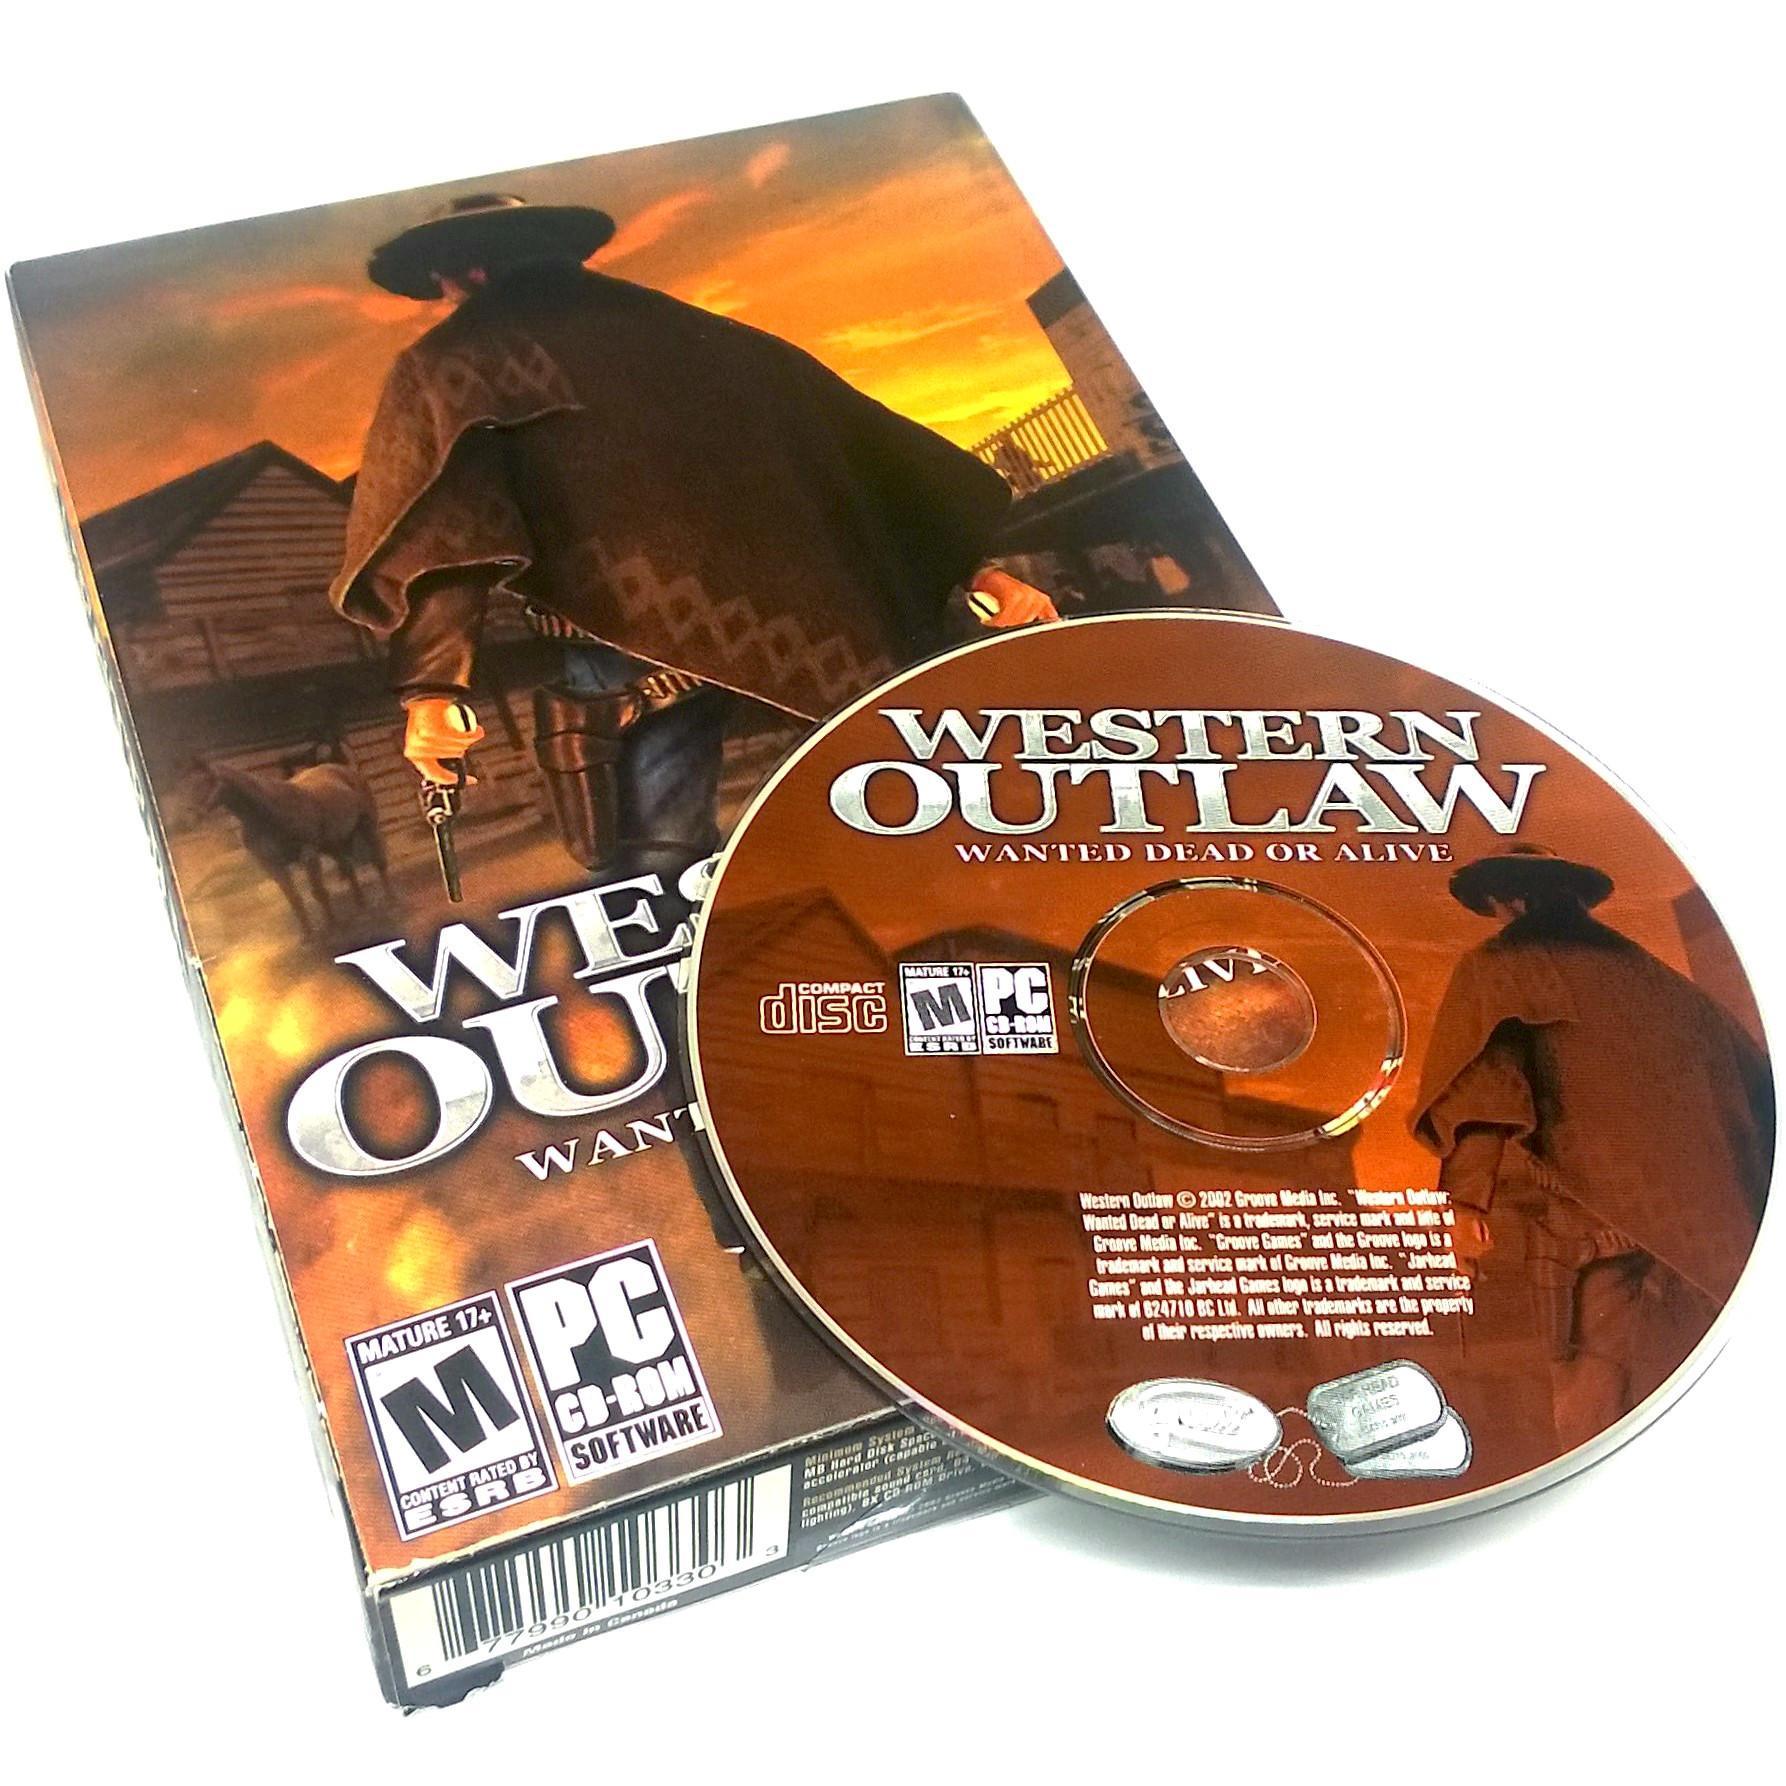 Western Outlaw: Wanted Dead or Alive for PC CD-ROM